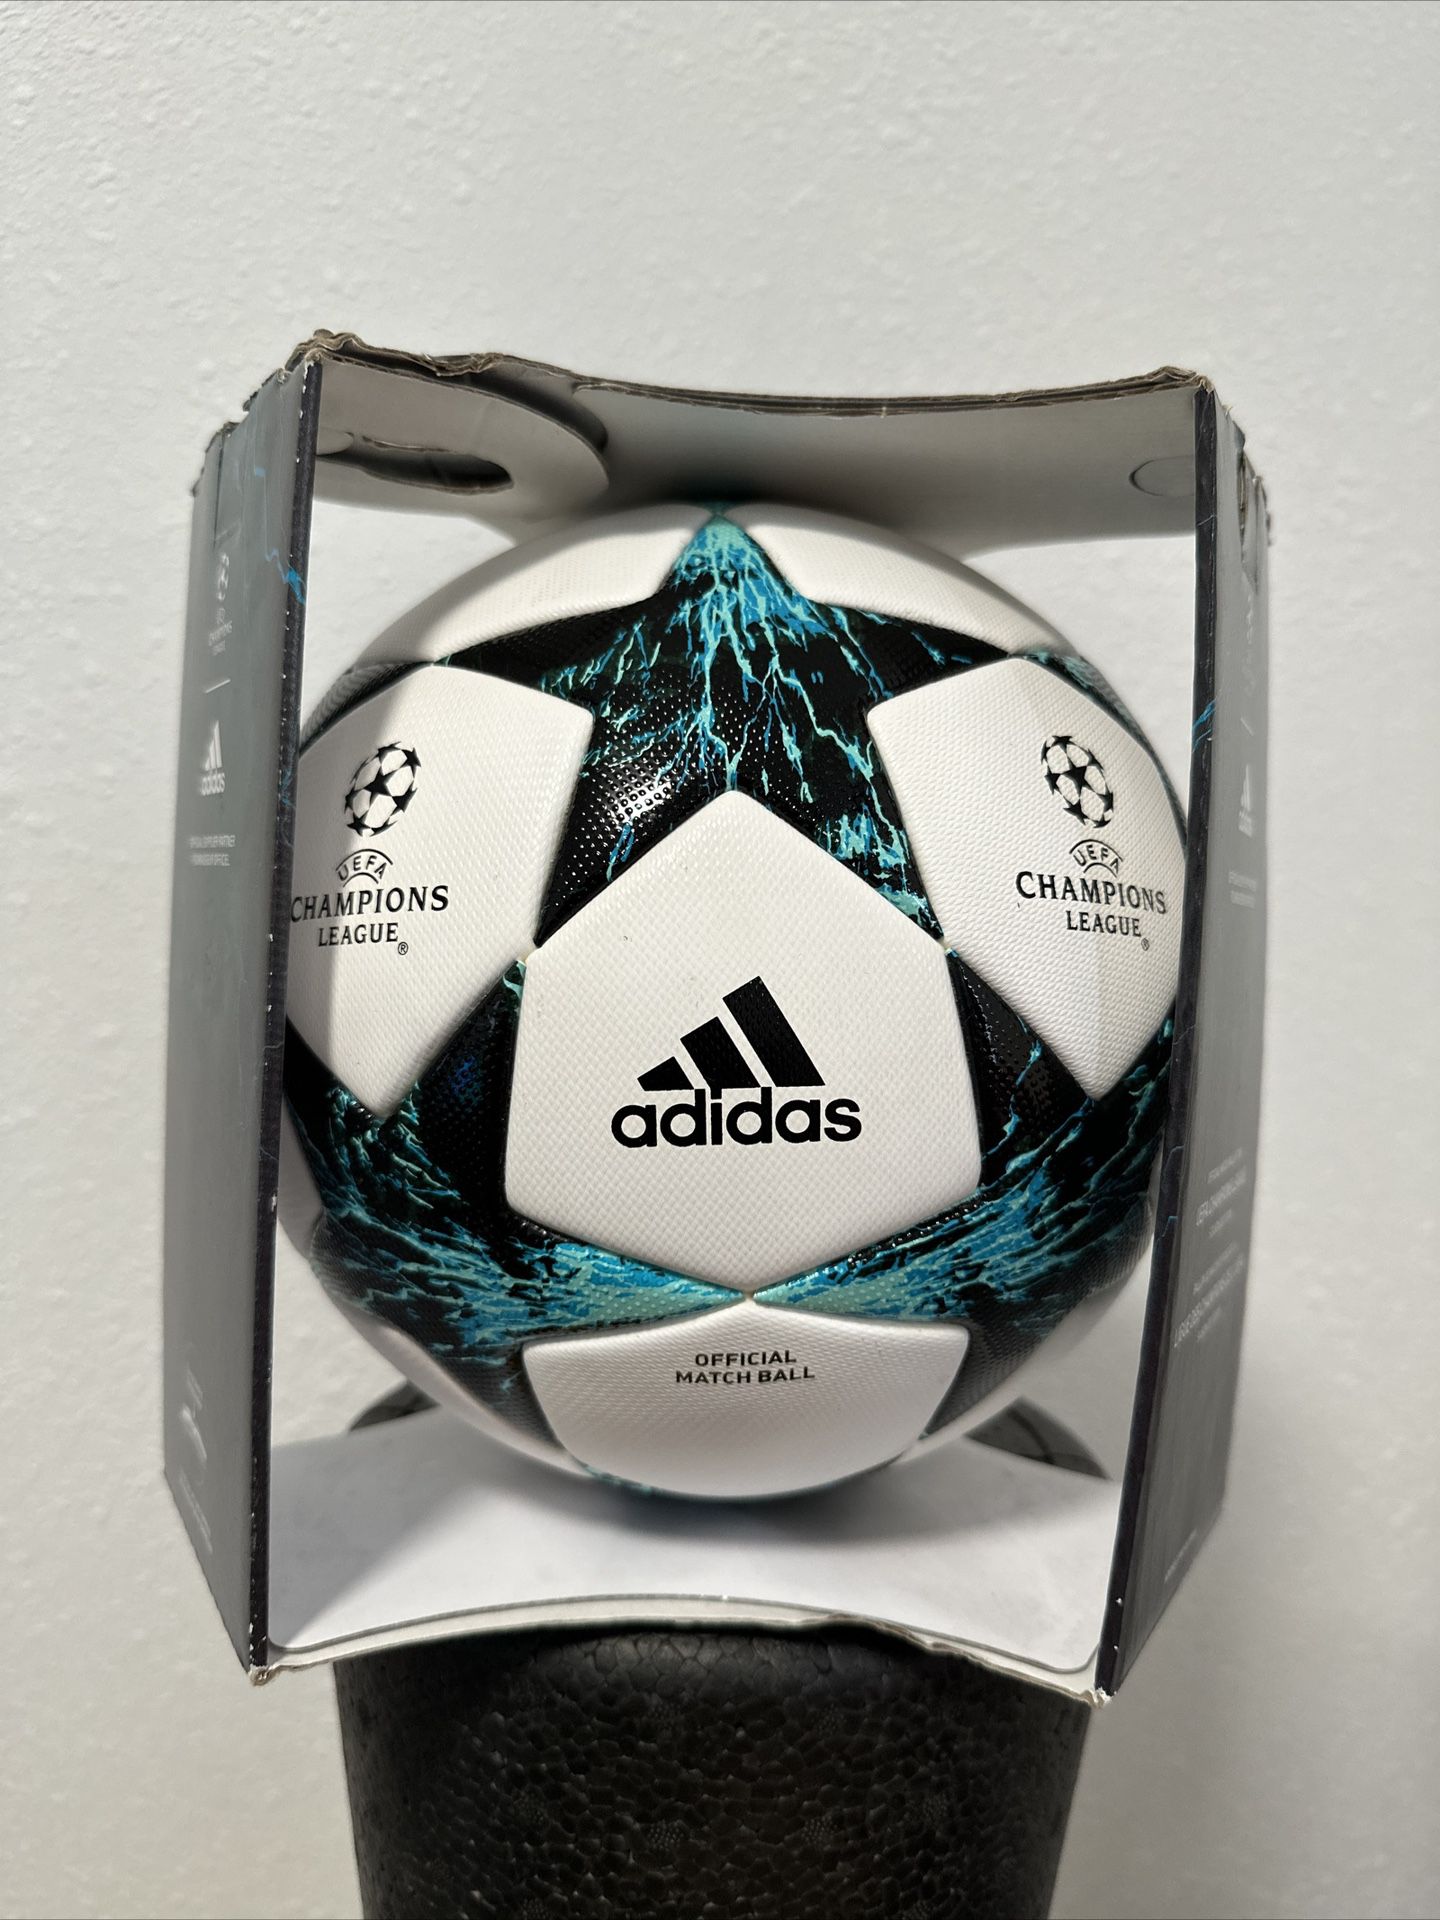 Adidas Finale 17 Official Match Ball Champions League 2017/2018 for Sale Kent, WA - OfferUp